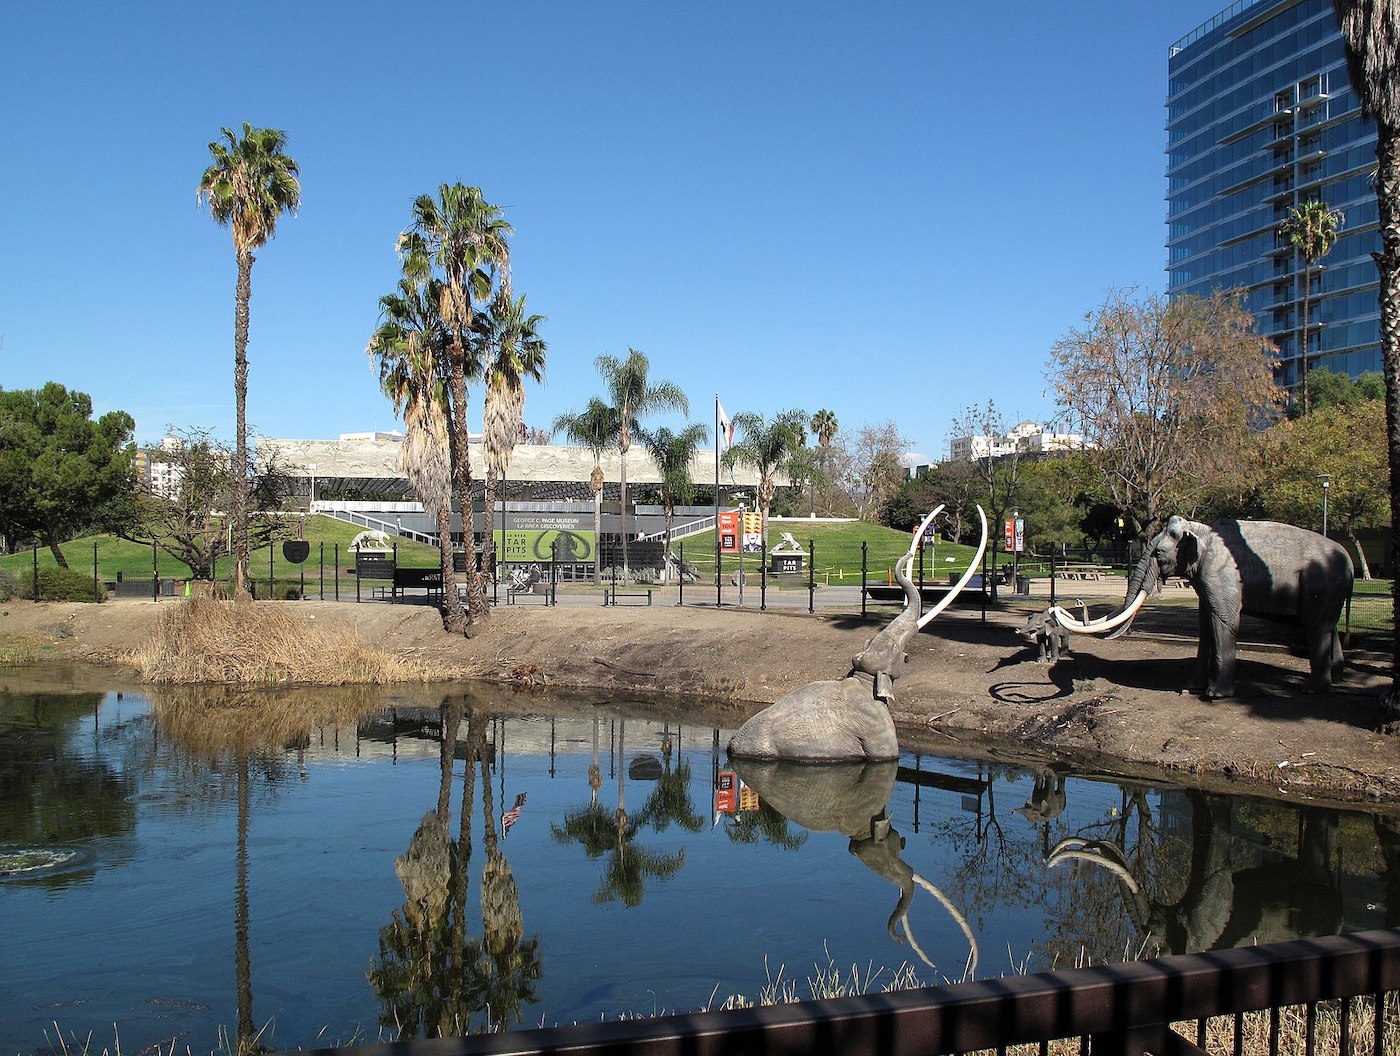 Statues of ancient megafauna, one stuck in a tar pit recreation